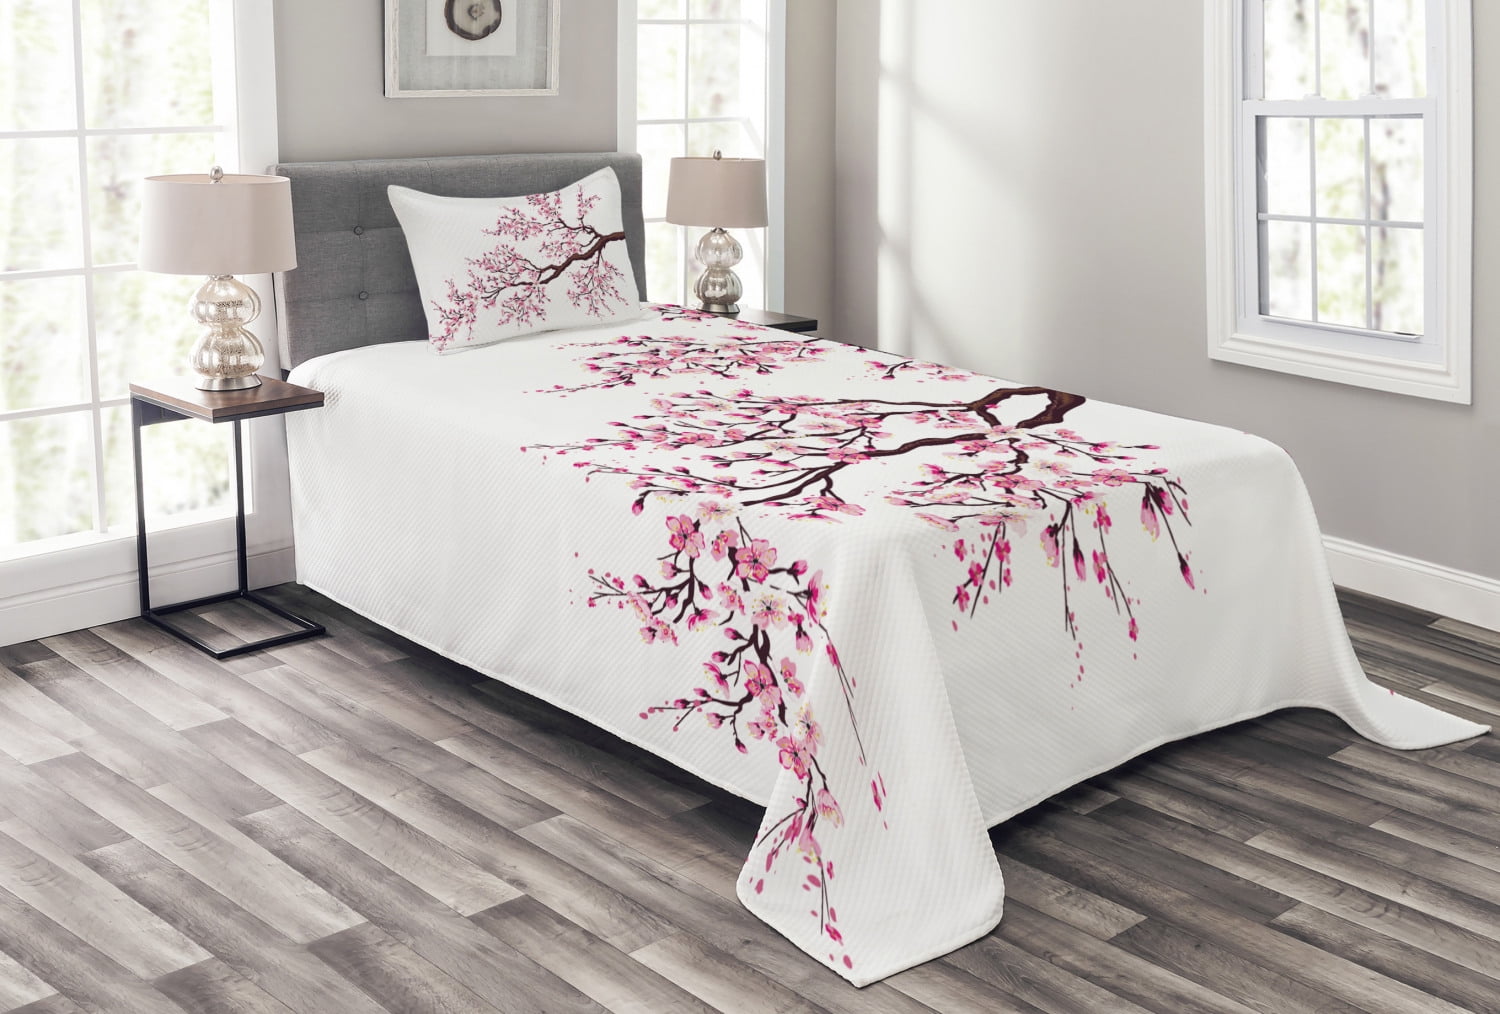 Queen Size Decorative 3 Piece Bedding Set with 2 Pillow Shams Japanese Scenery Sakura Tree Cherry Blossom Nature Photography Coming of Spring Burgundy Teal Ambesonne Peach Duvet Cover Set 